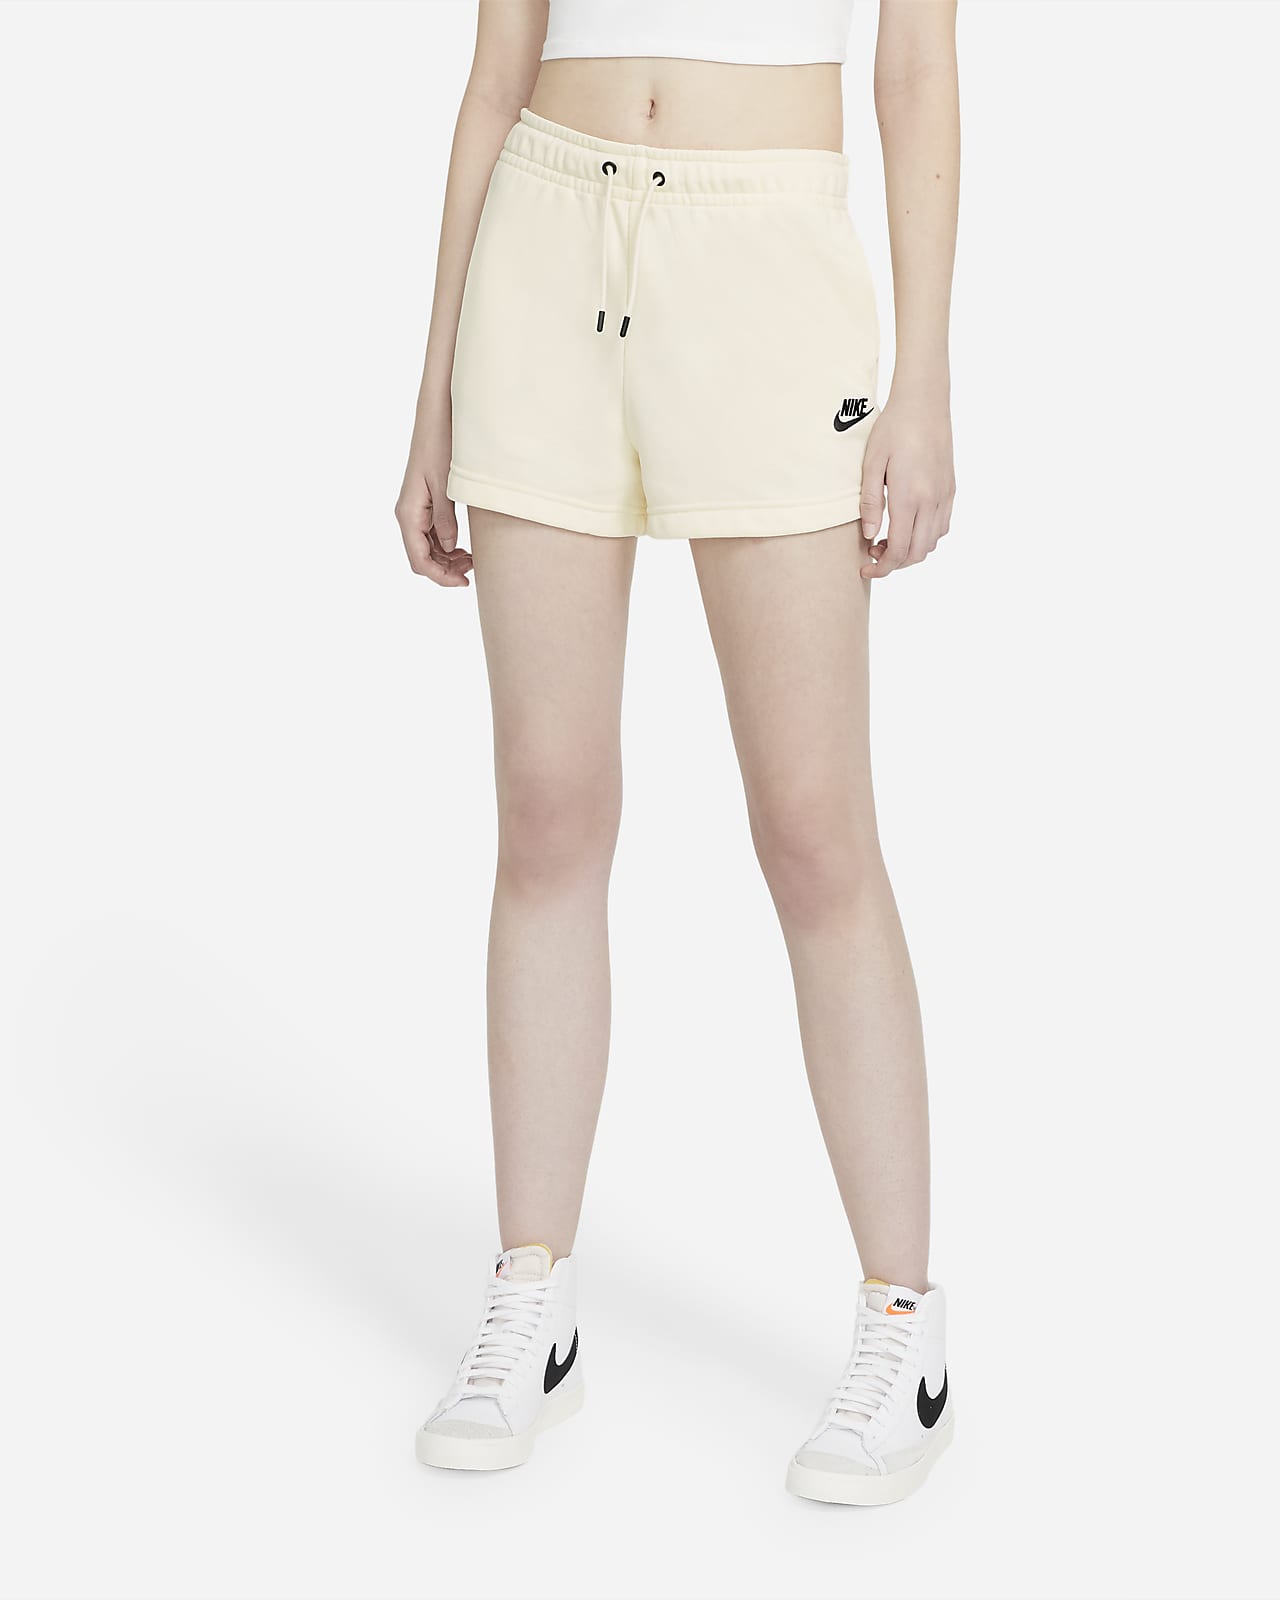 Buy > nike essential french terry shorts > in stock